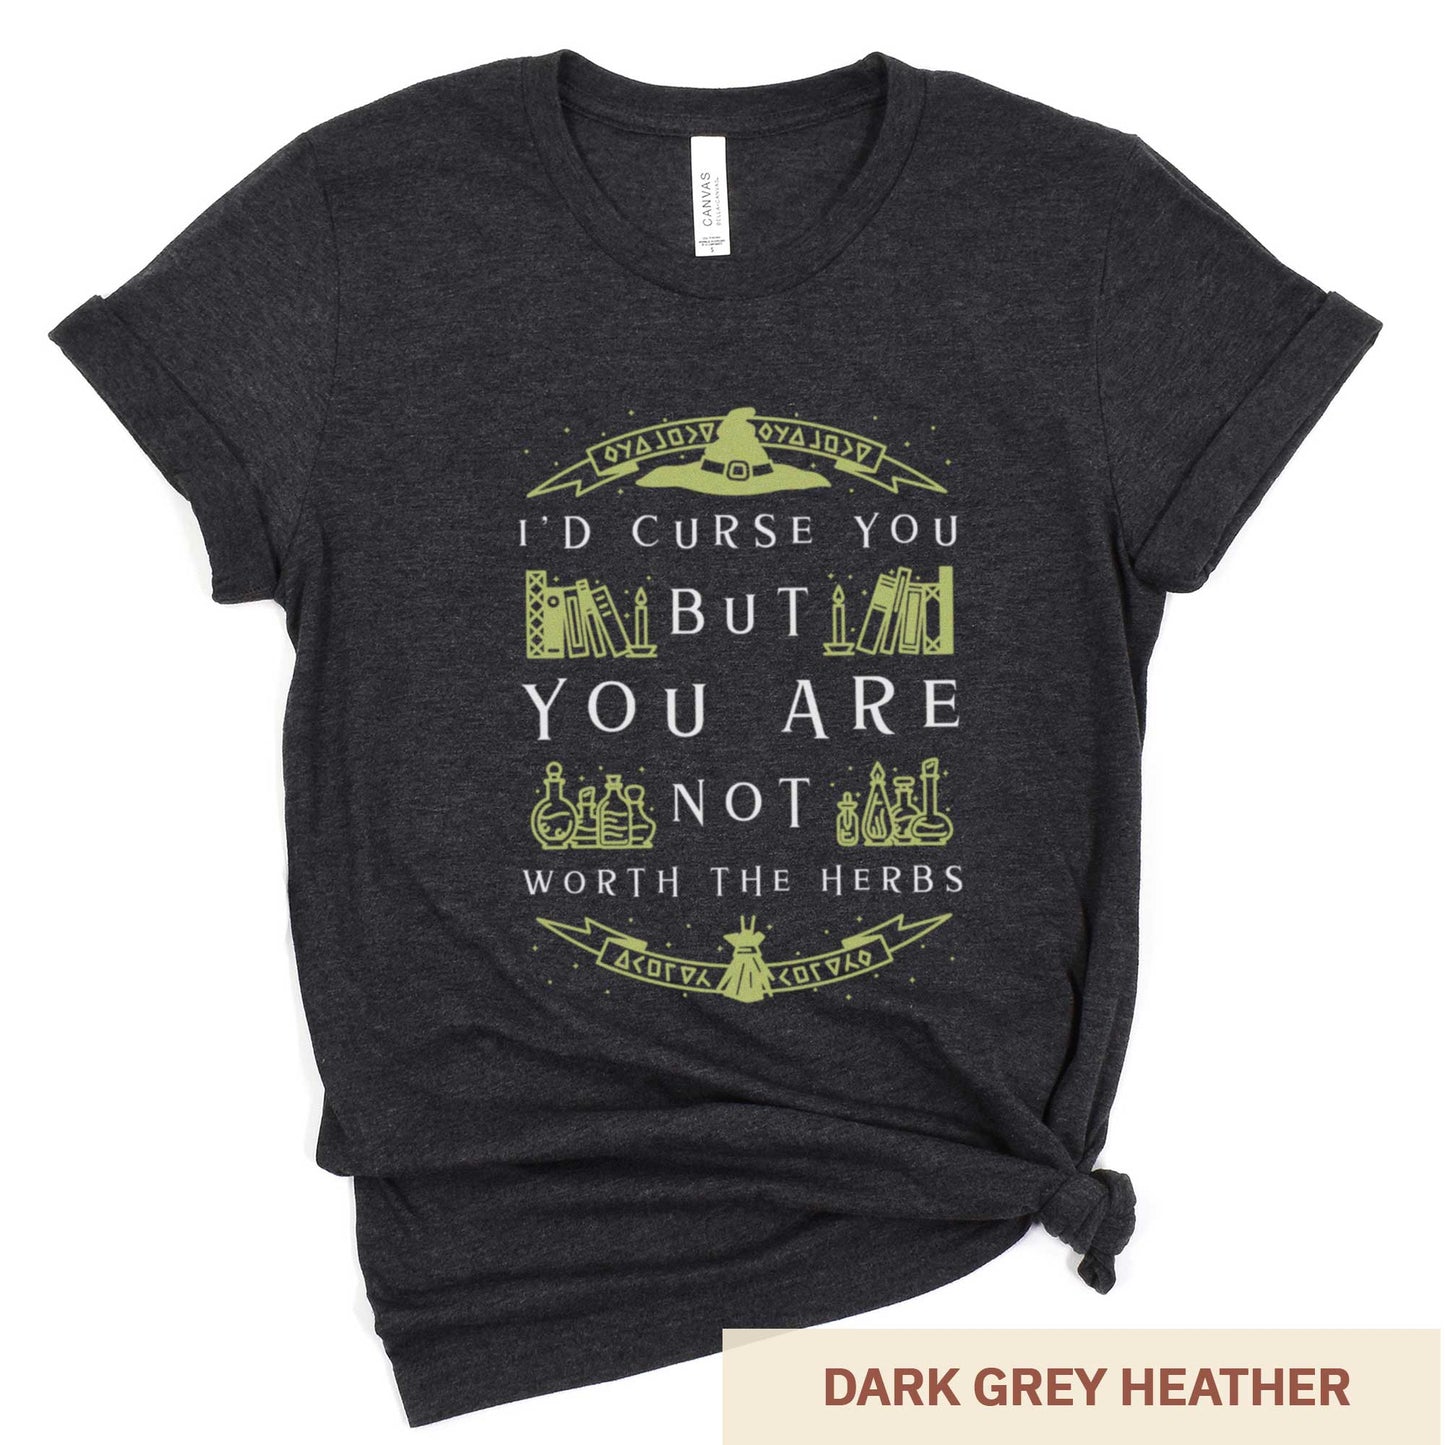 A dark grey heather Bella Canvas t-shirt with a witch's hat, books and potions and the words I'd curse you but you are not worth the herbs.